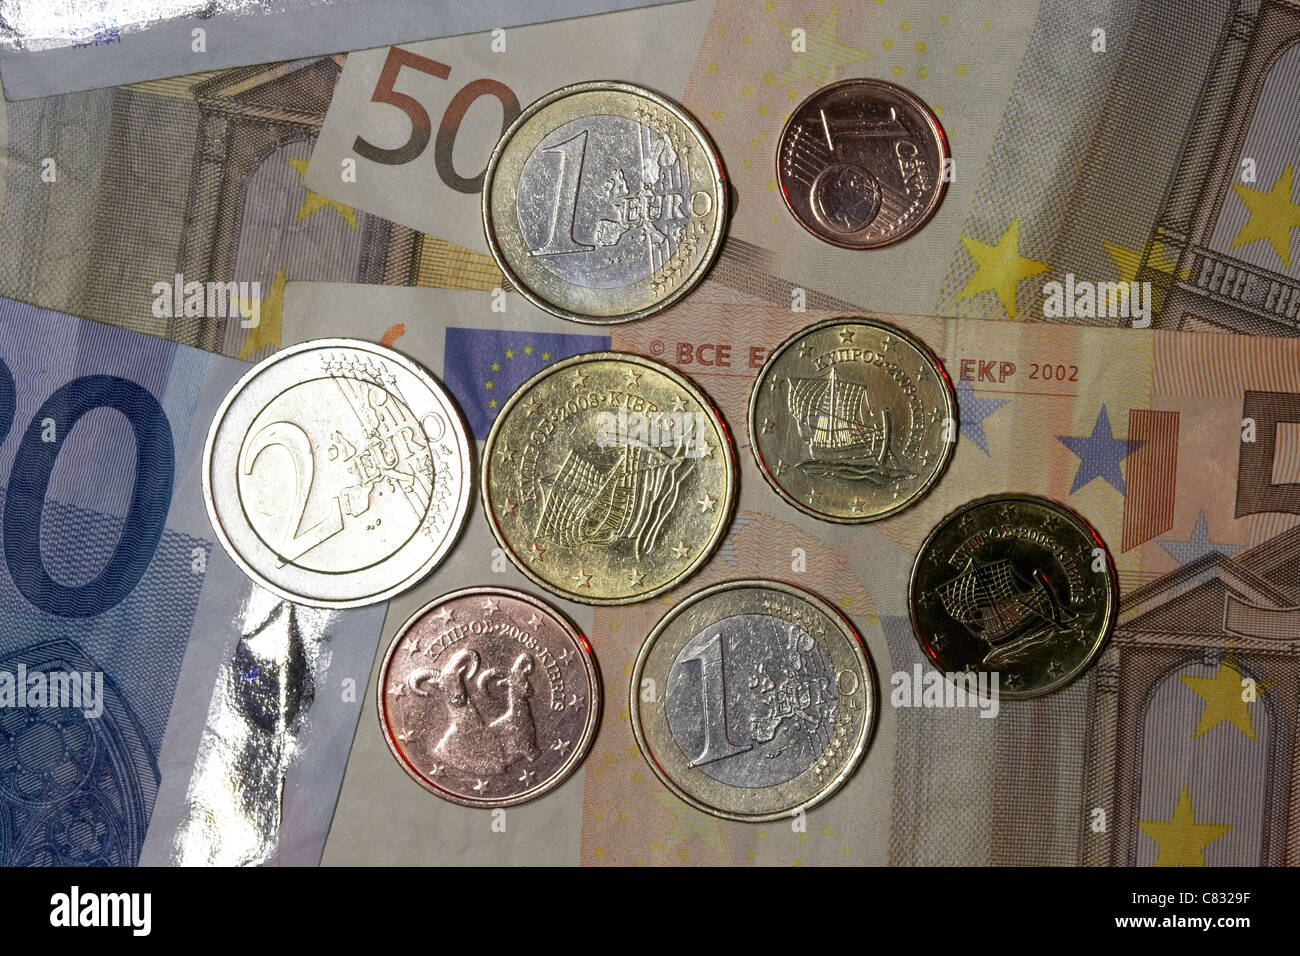 cypriot euro banknotes and coins euros from cyprus kypros Stock Photo